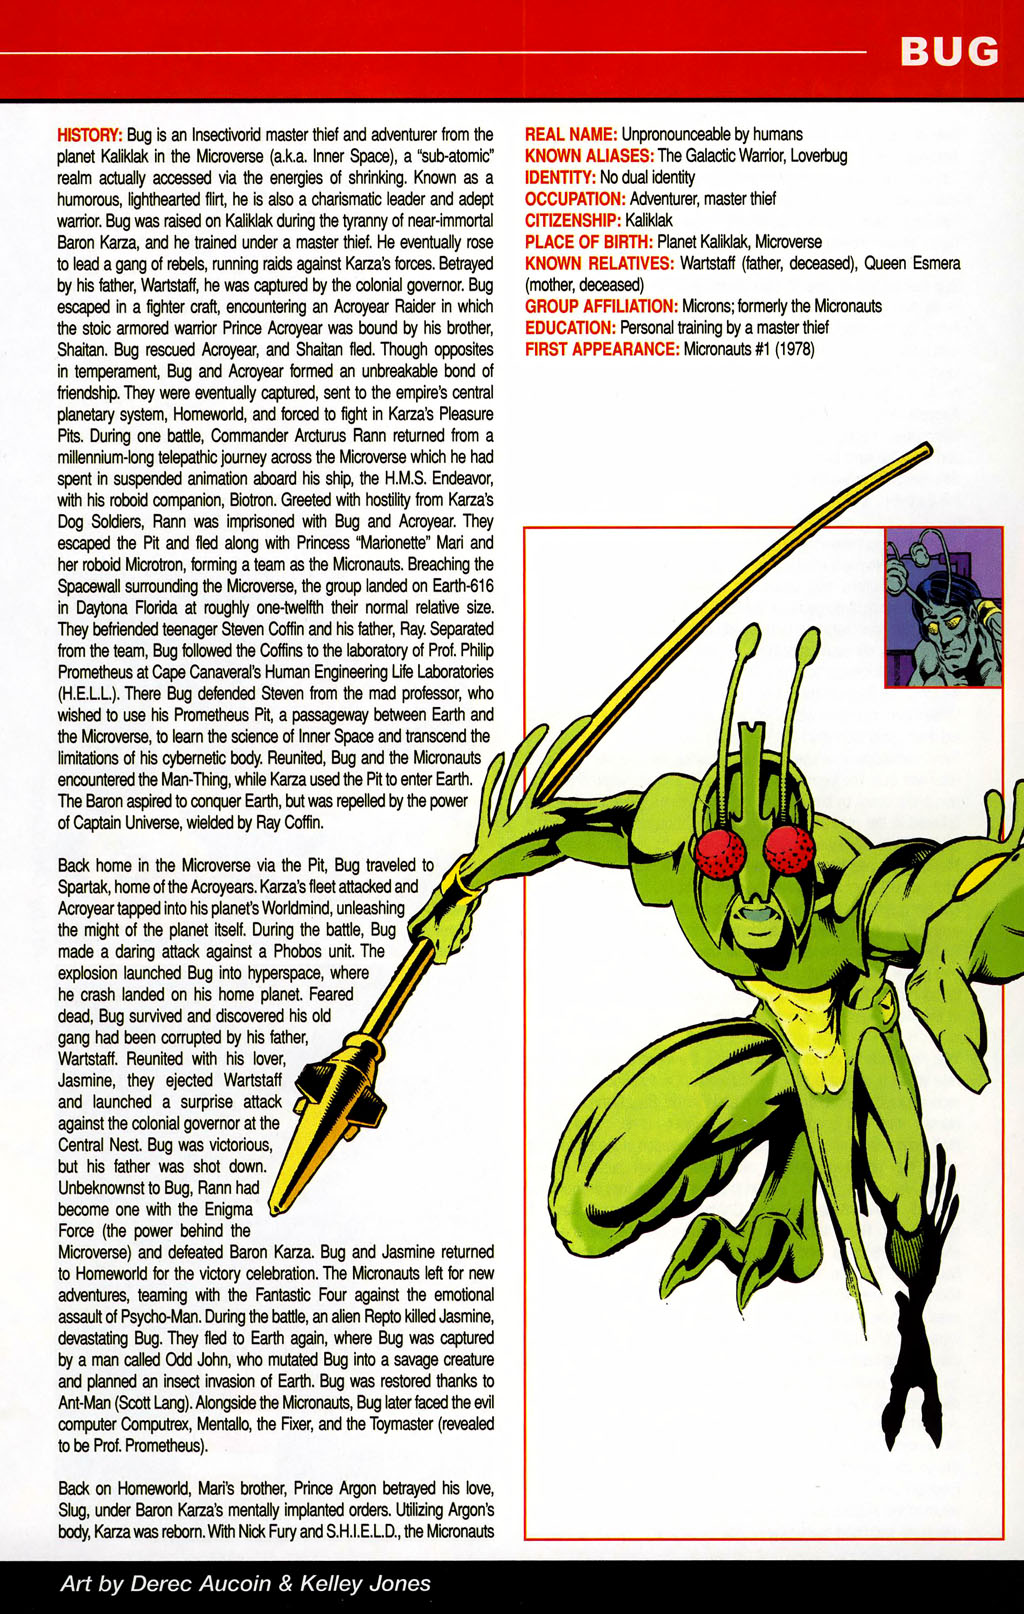 Marvel Universe biography page 1 for Bug